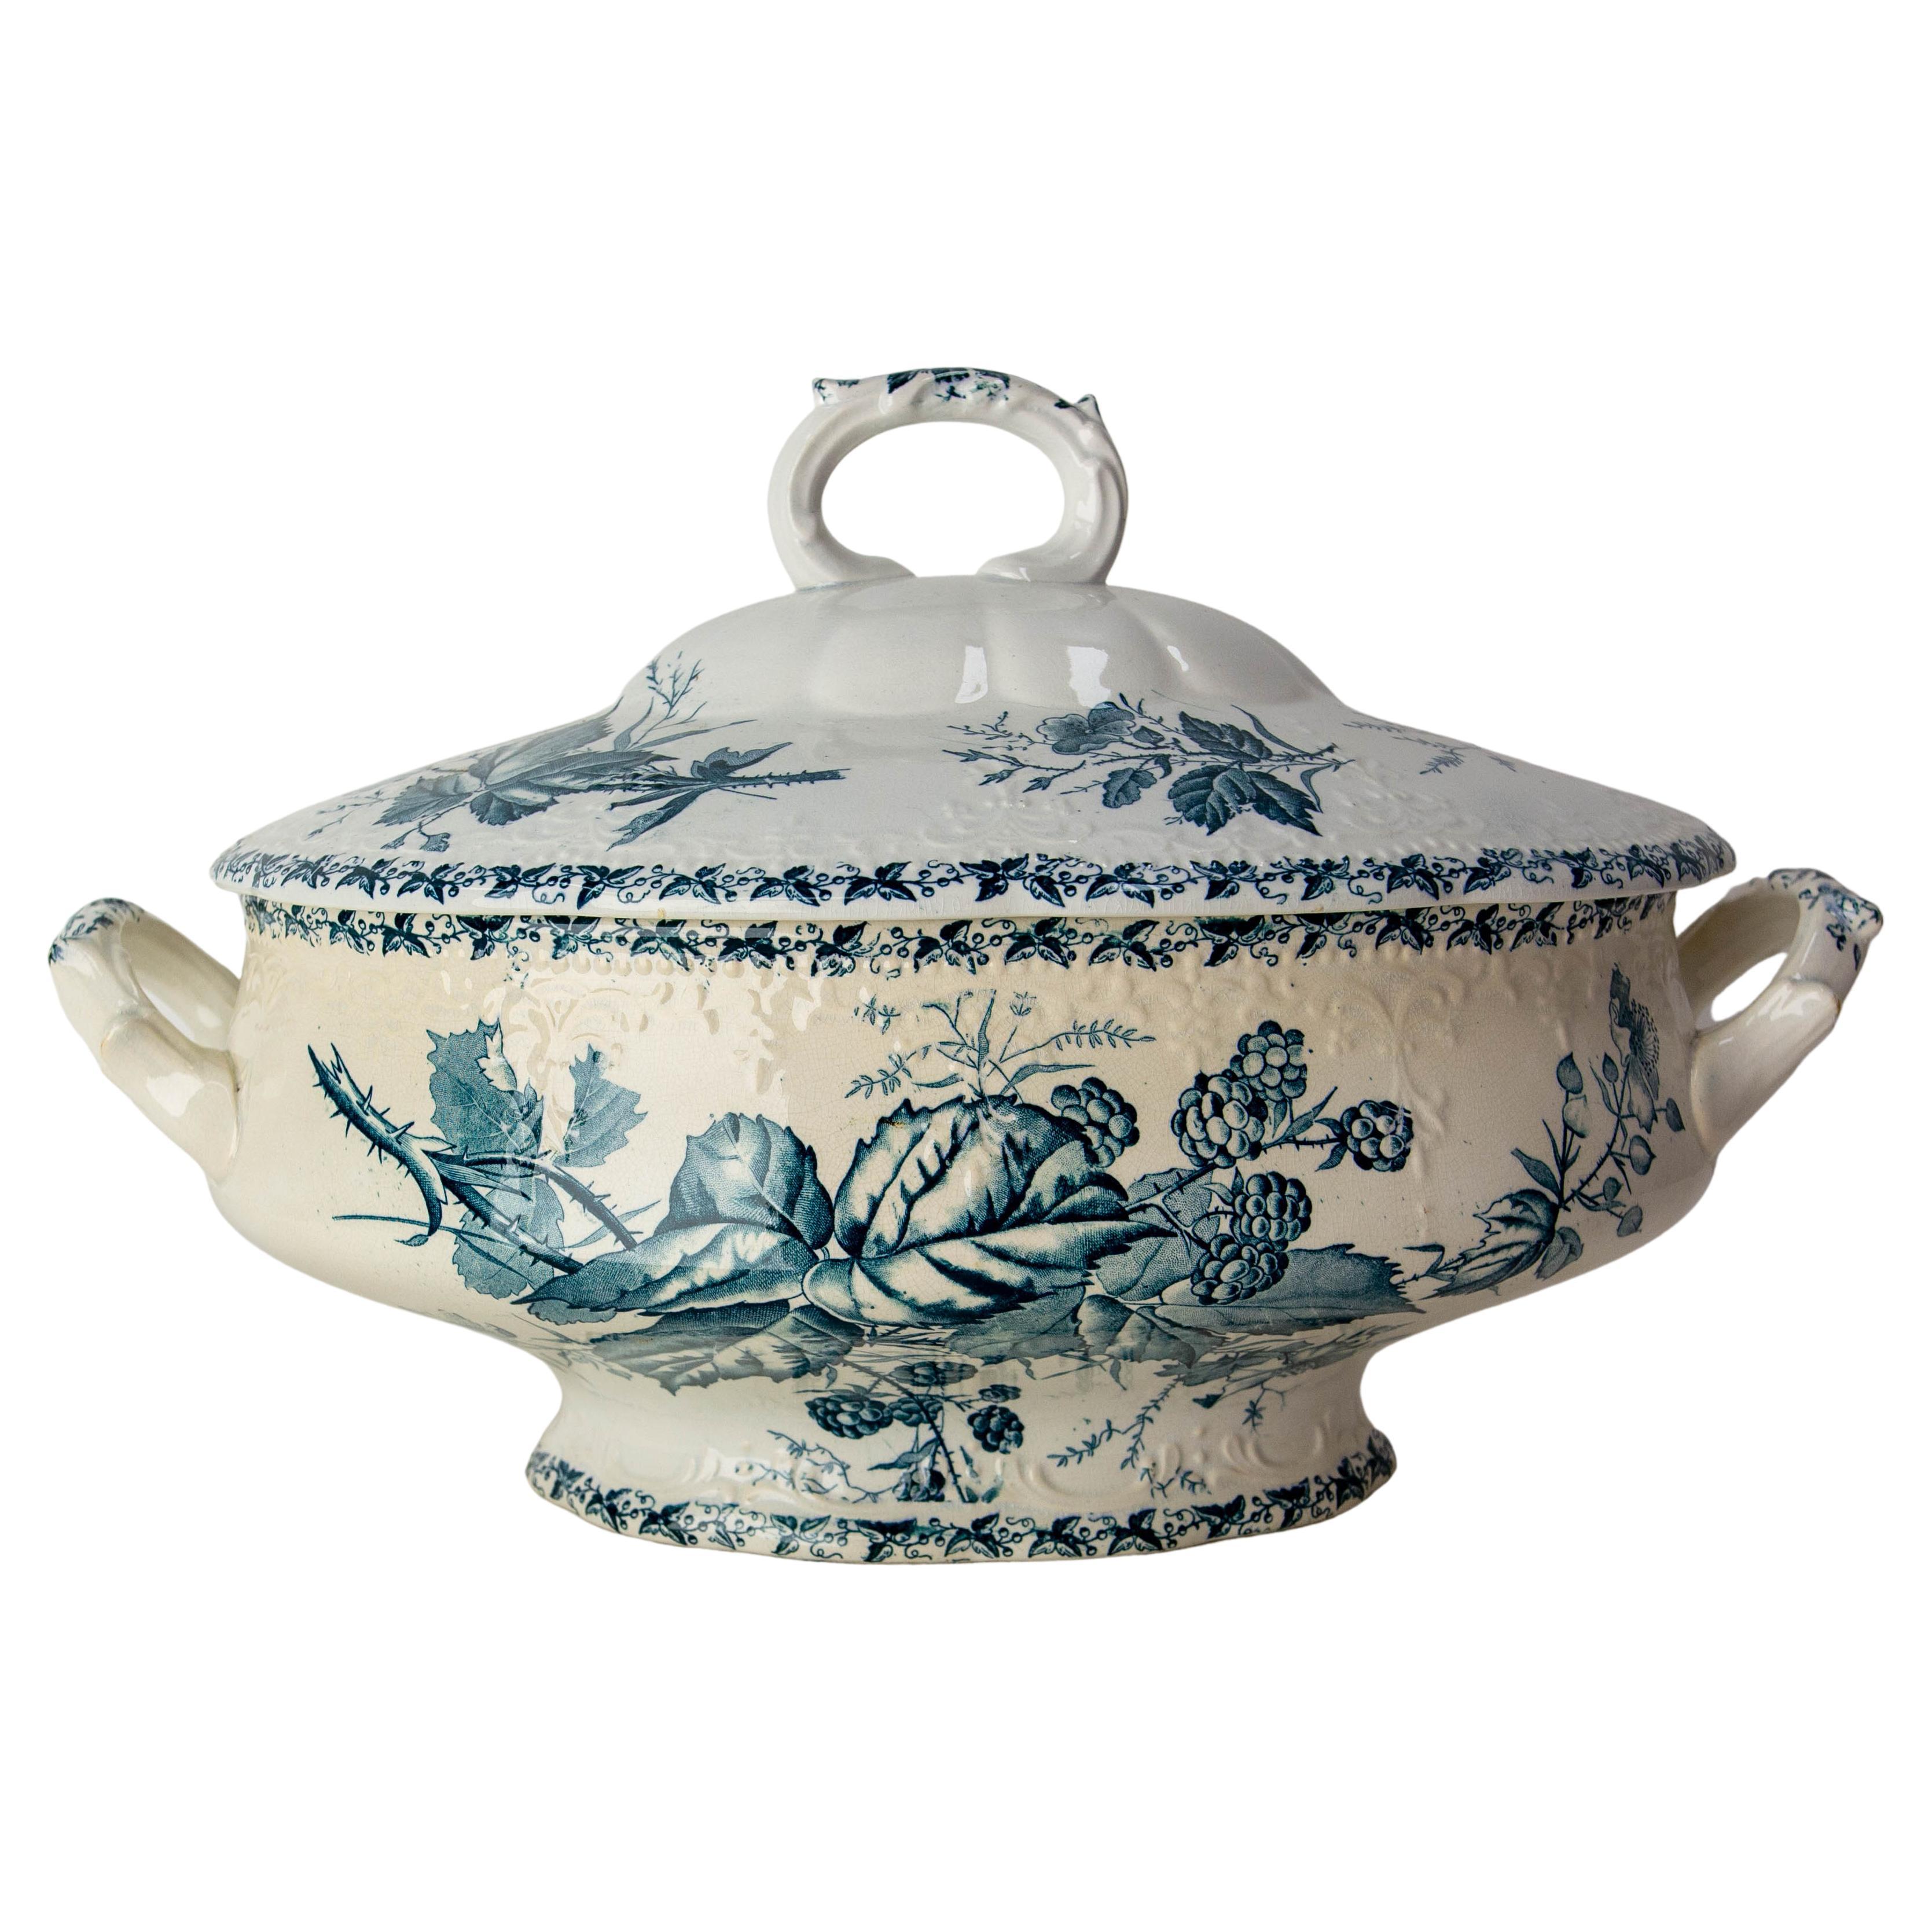 French Faience Soup Tureen with Floral Decoration, circa 1900